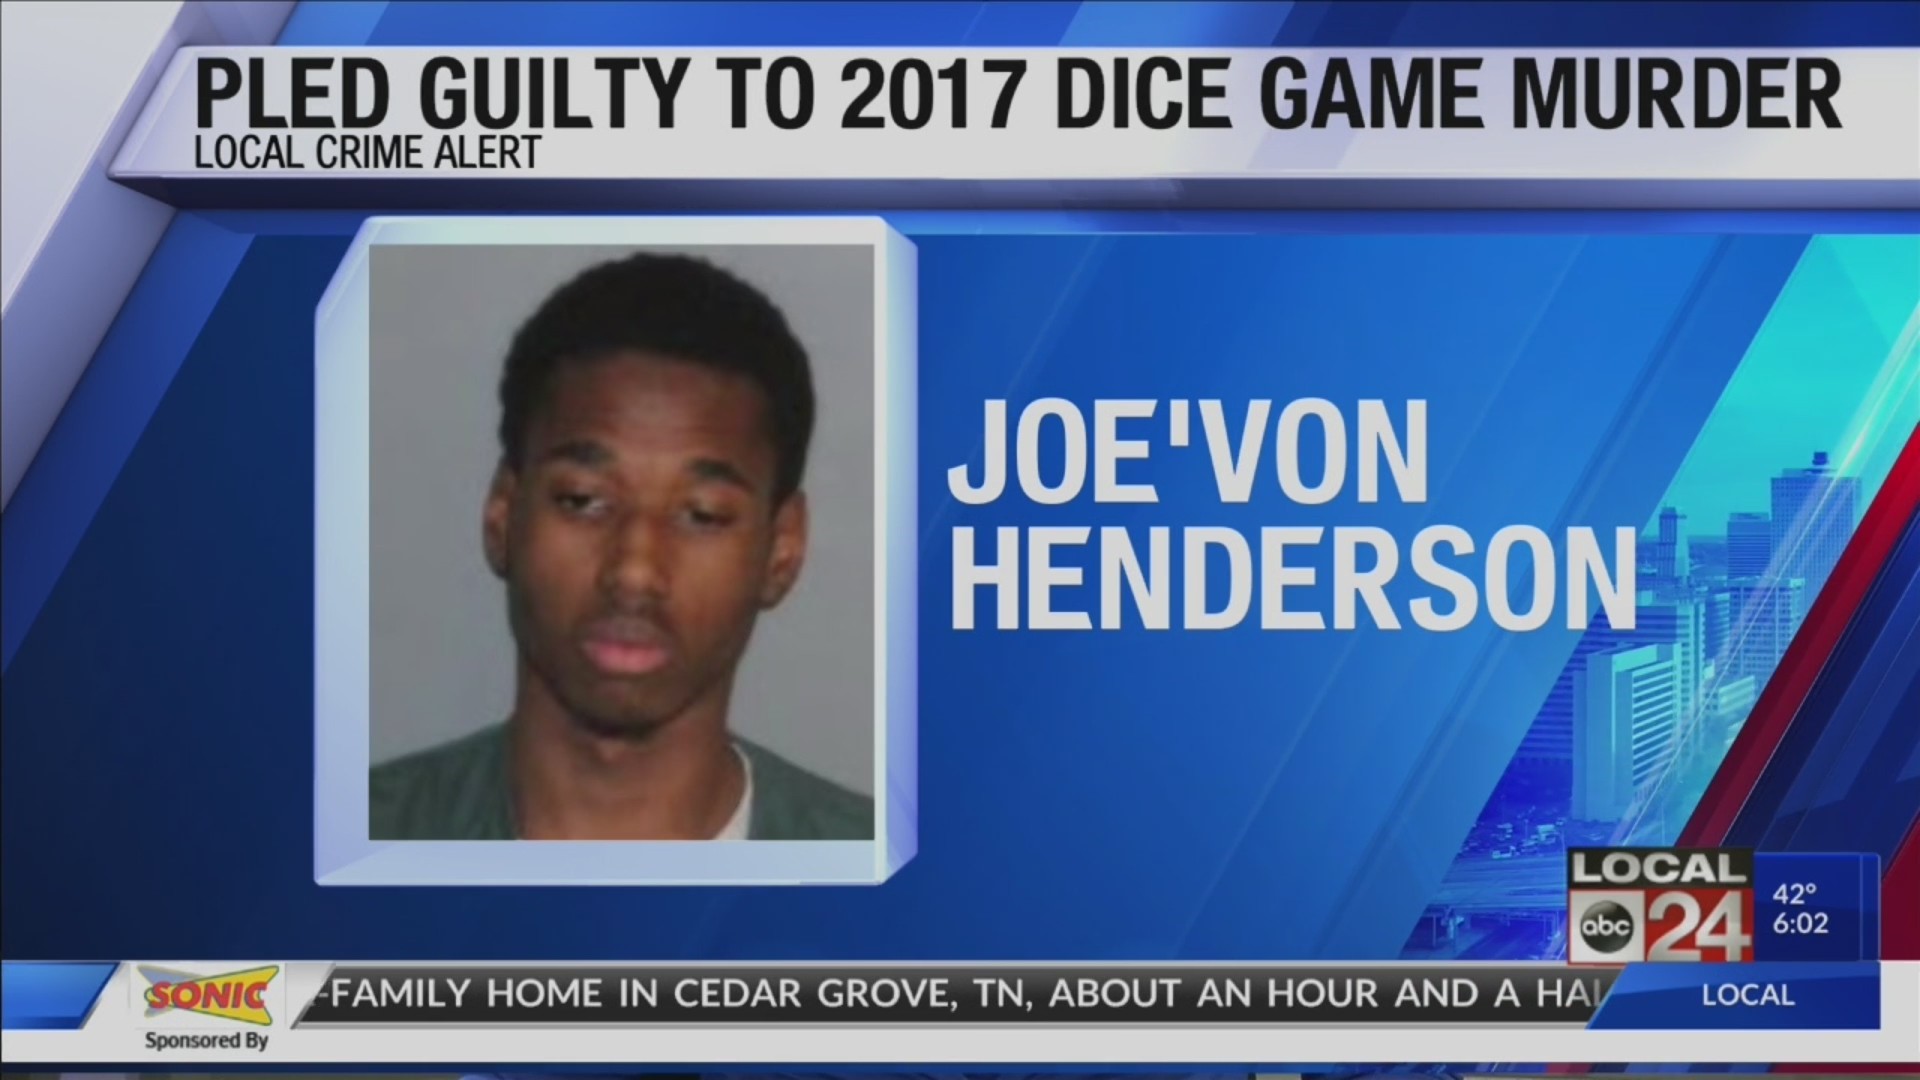 Man sentenced to 13+ years in prison after guilty plea in deadly 2017 dice game shooting